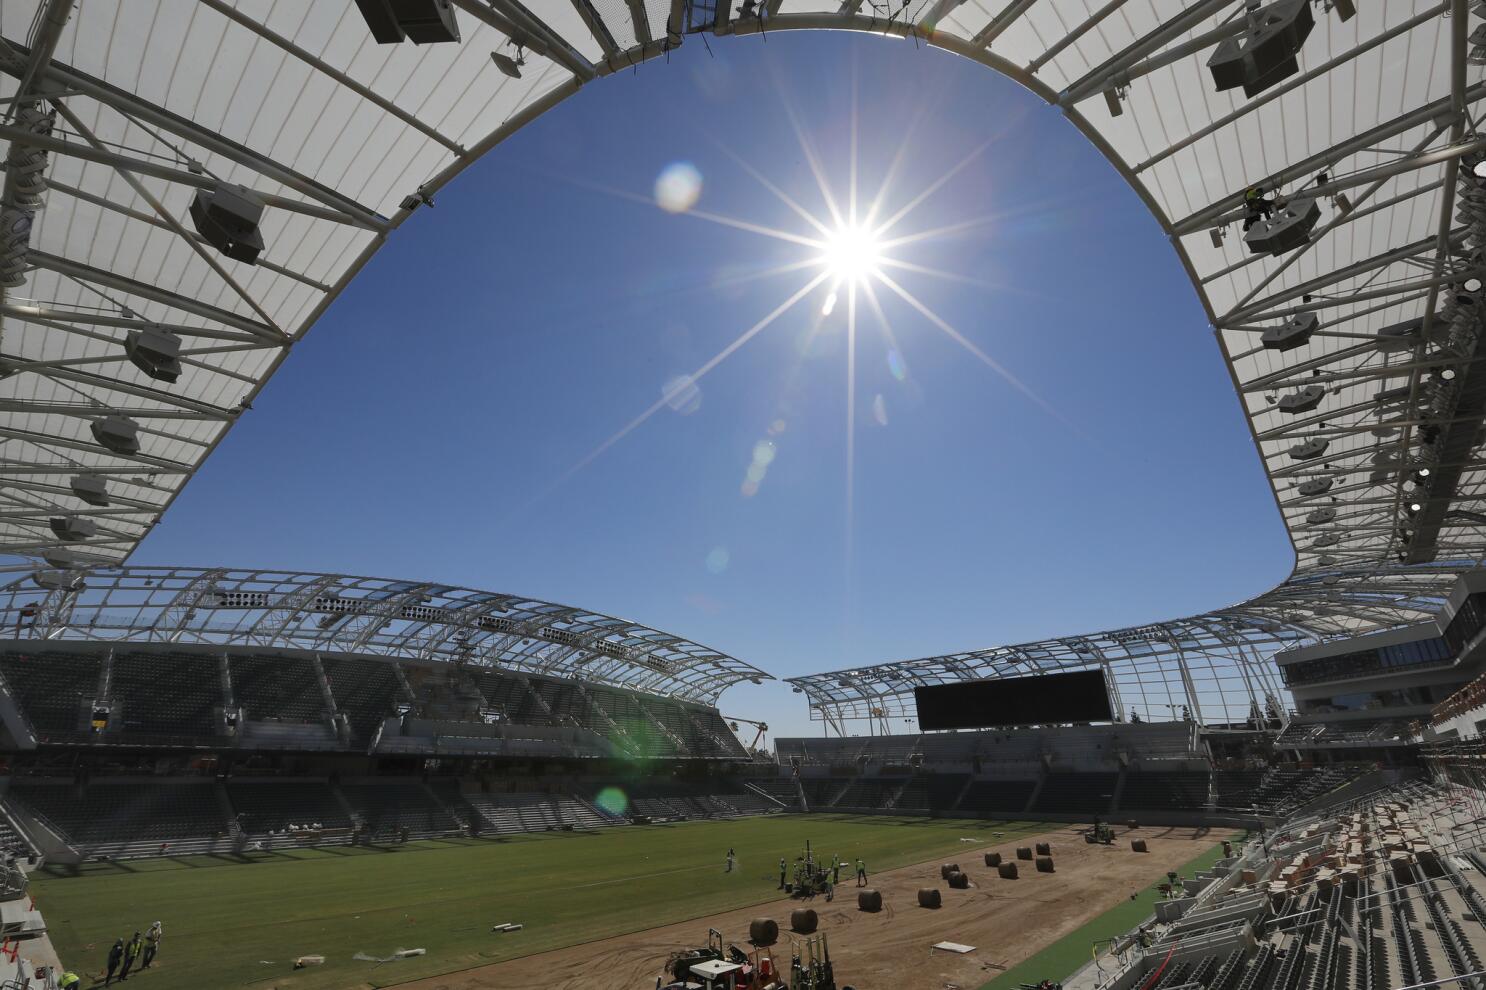 MLS cancels 2020 All-Star Game, Leagues Cup and Campeones Cup